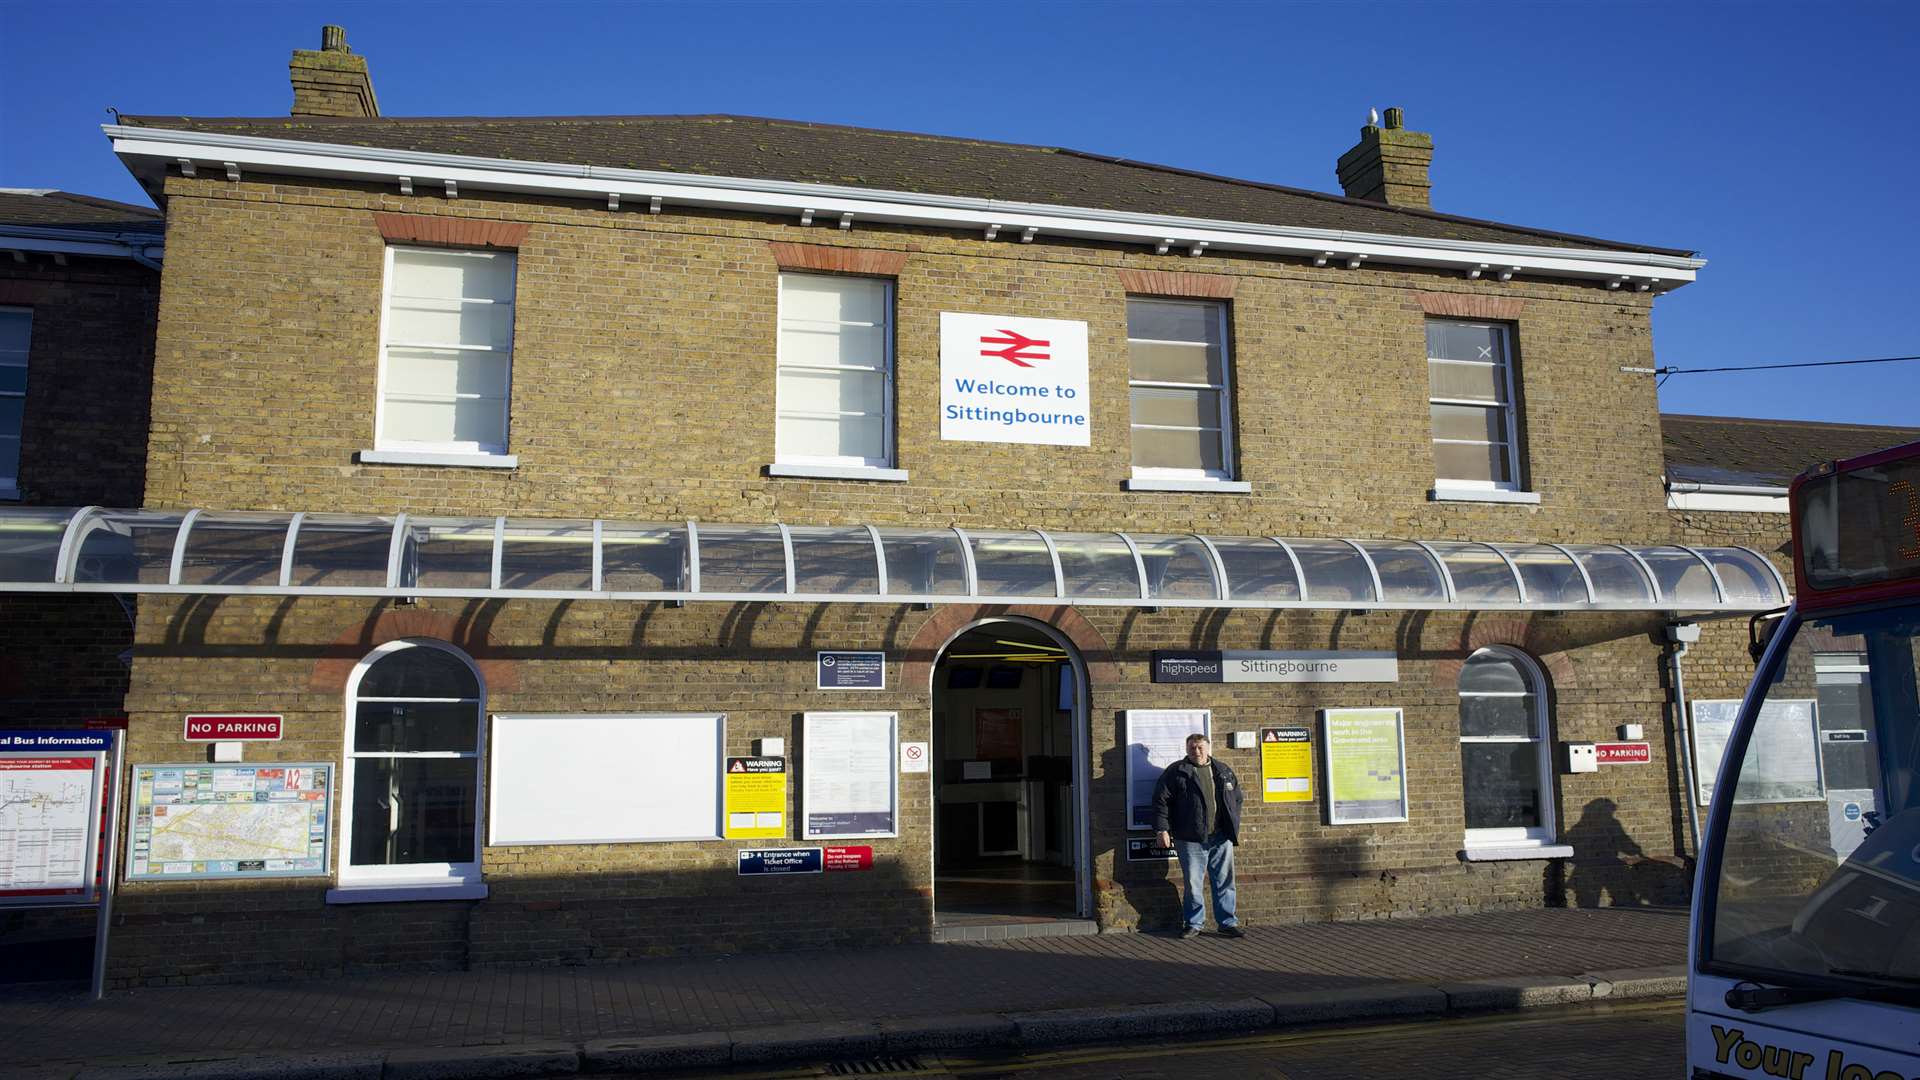 The man boarded the train with other passengers at Sittingbourne railway station